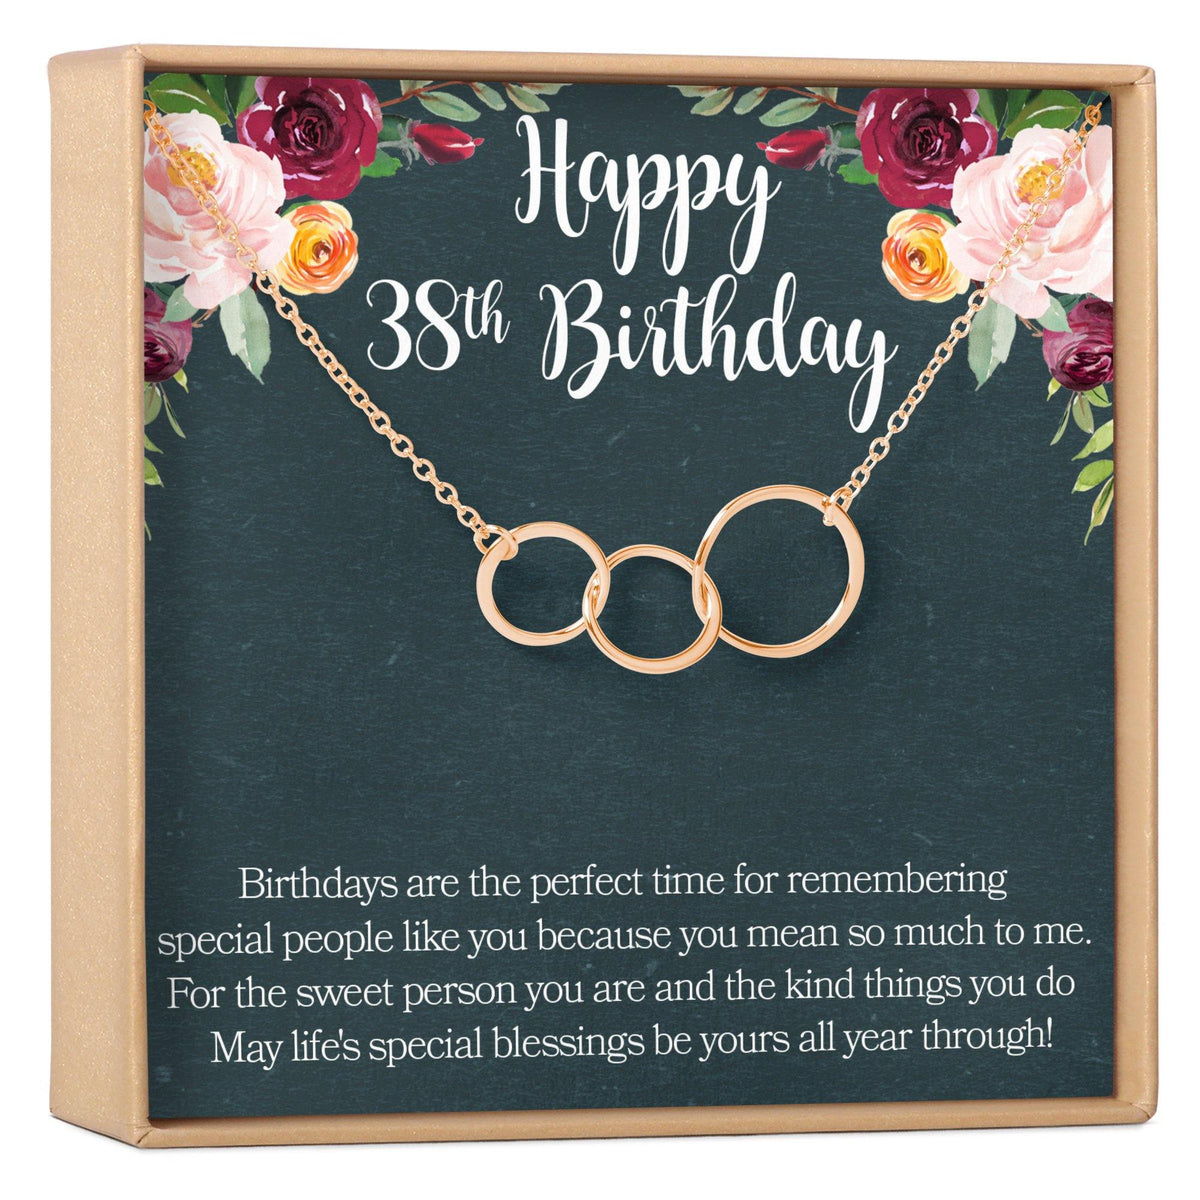 38th Birthday Necklace - Dear Ava, Jewelry / Necklaces / Pendants